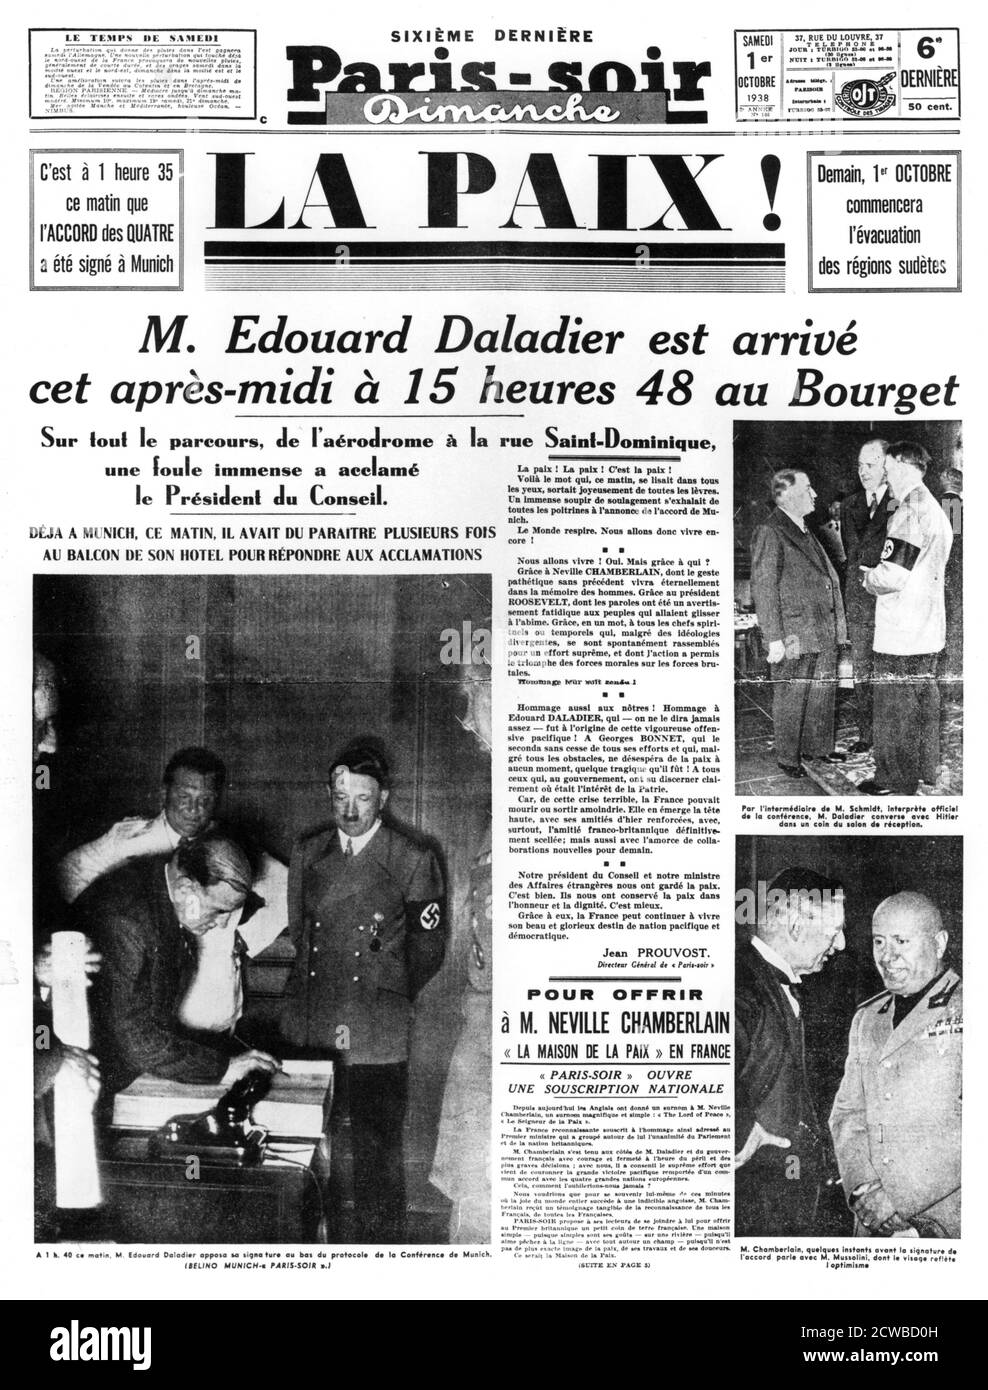 Peace!, front page of Paris-soir newspaper, 1 October 1938. The headline  story reports the conclusion of the peace agreement at Munich between  Britain, France and Germany that would provide peace in our